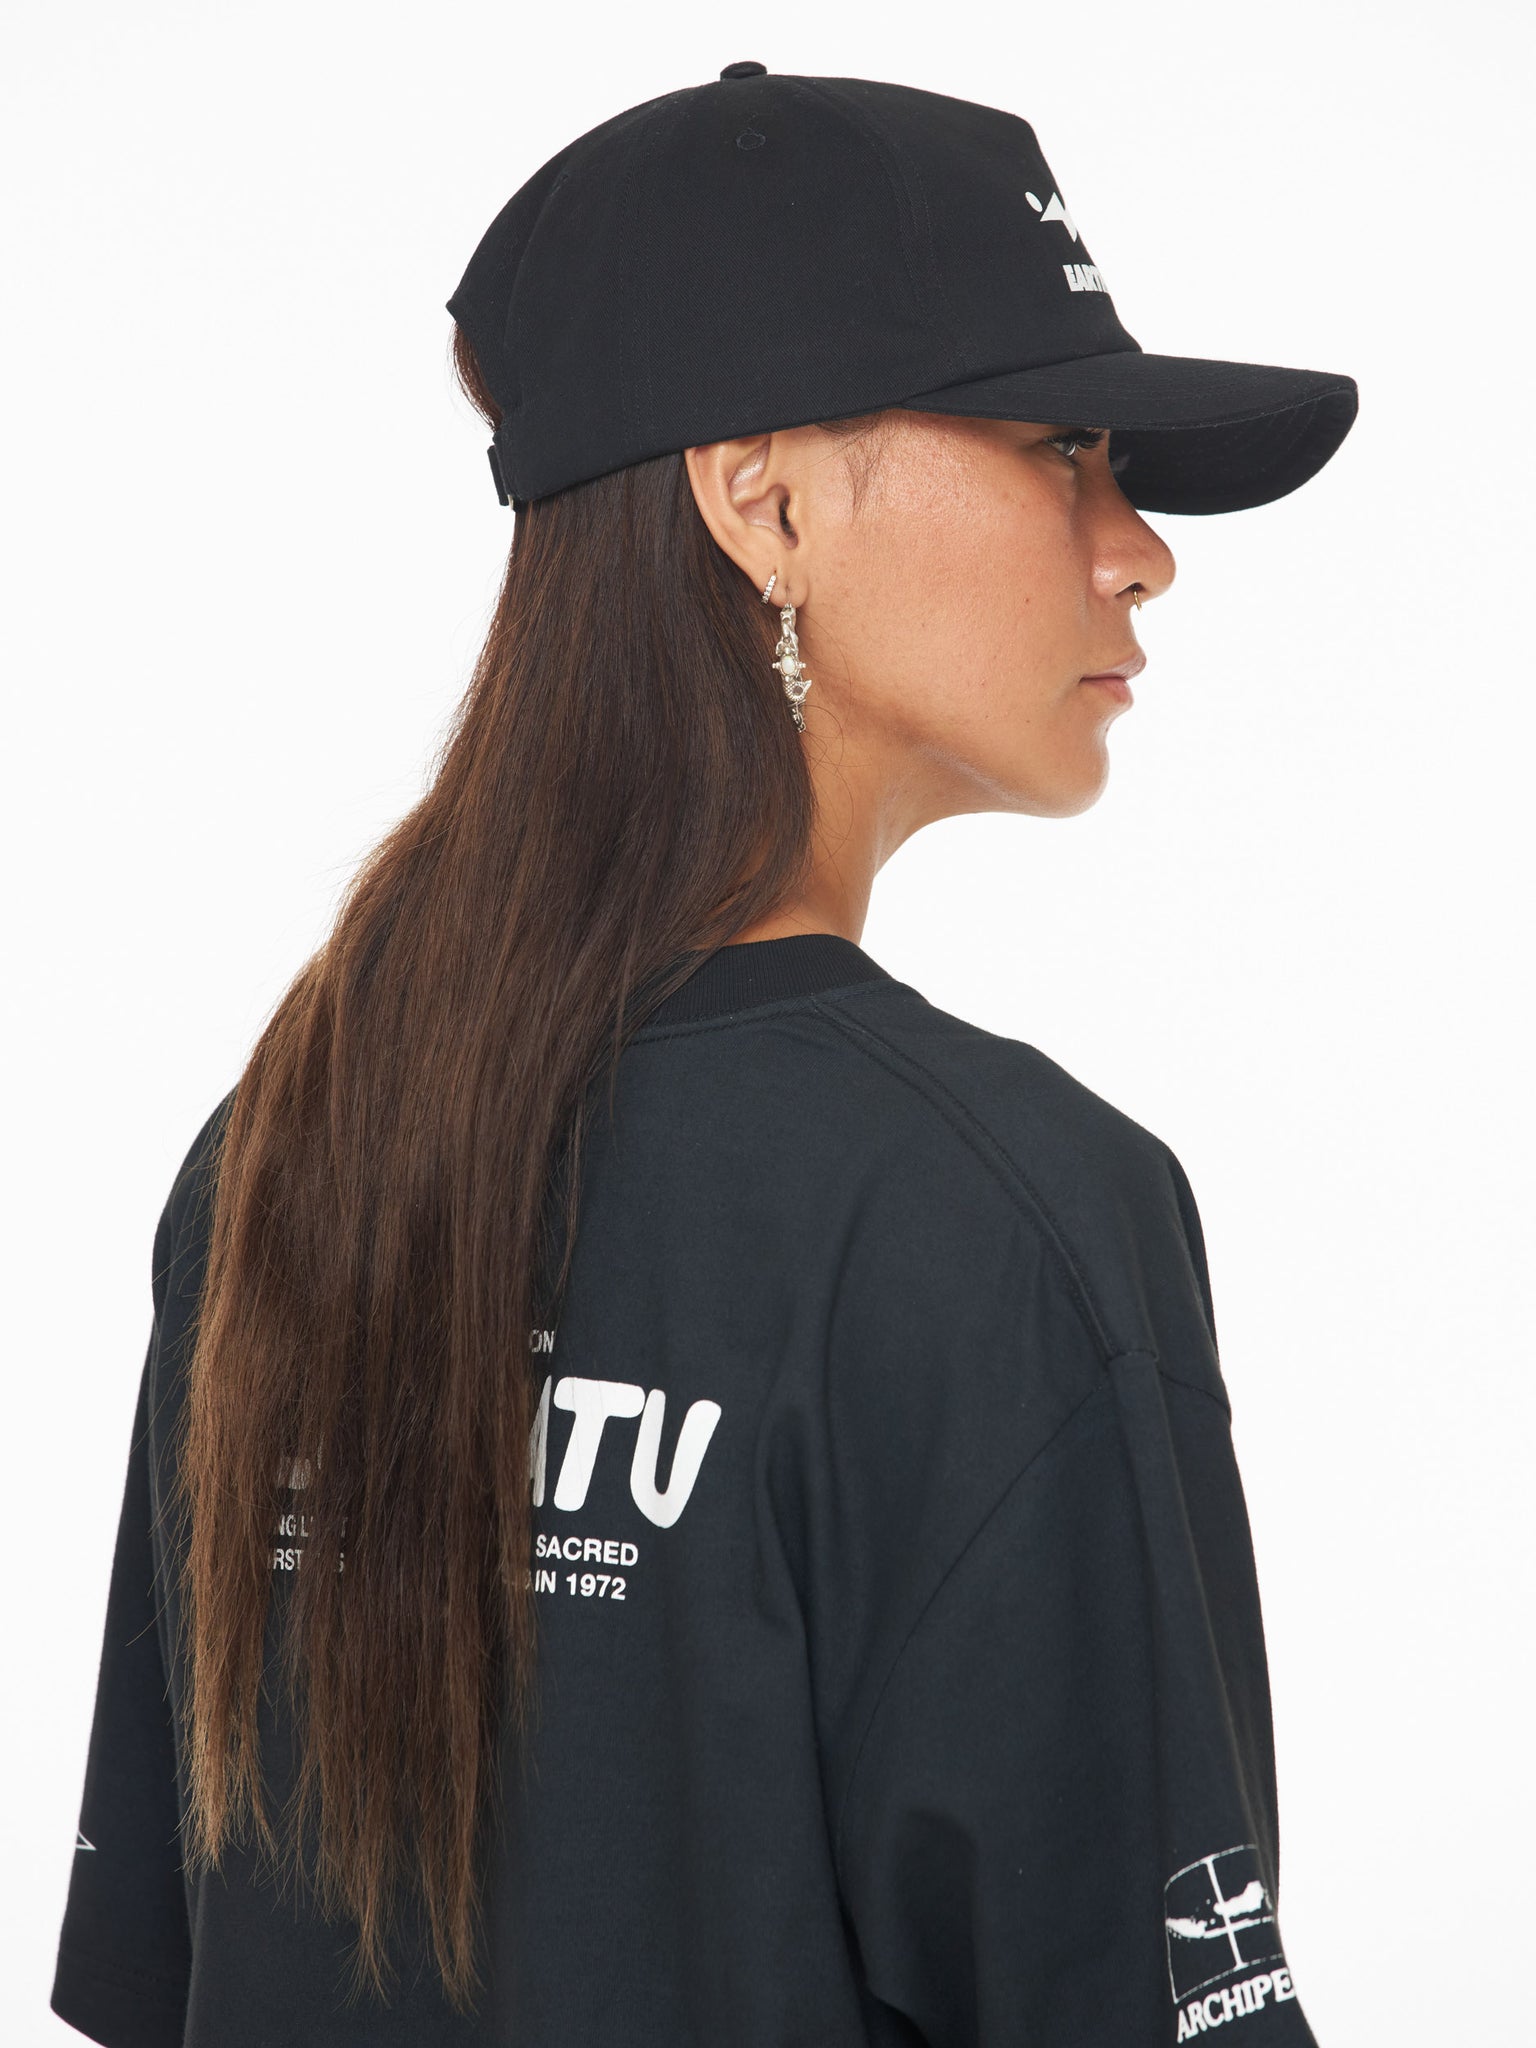 Earth Island - Surf Culture and Lifestyle - Product - Black Cap